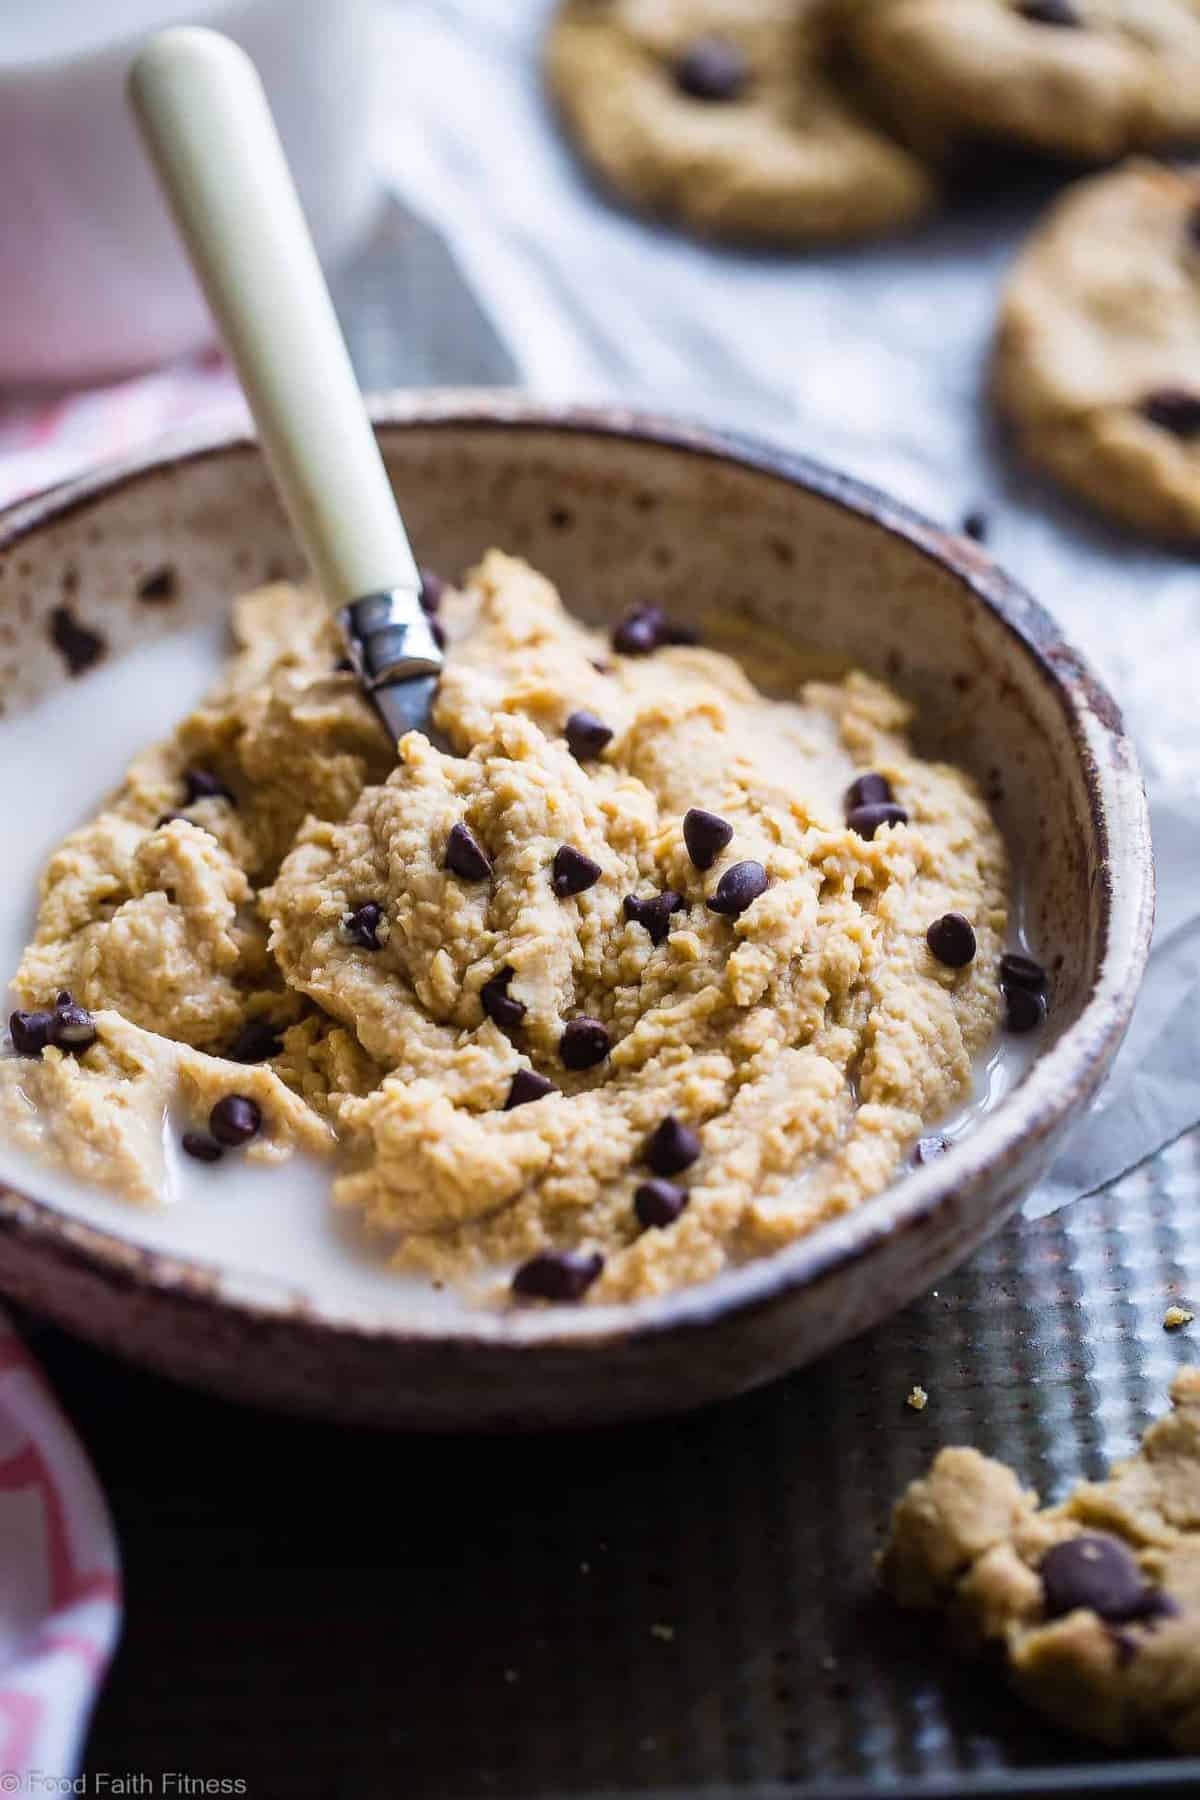 Vegan Cookie Dough Breakfast Bowls - Wake up to cookie dough for breakfast! Make-ahead friendly, gluten/grain/dairy free and packed with protein! Eating a healthy breakfast never tasted so good! | #Foodfaithfitness | #Vegan #Glutenfree #Cookiedough #Dairyfree #Healthy